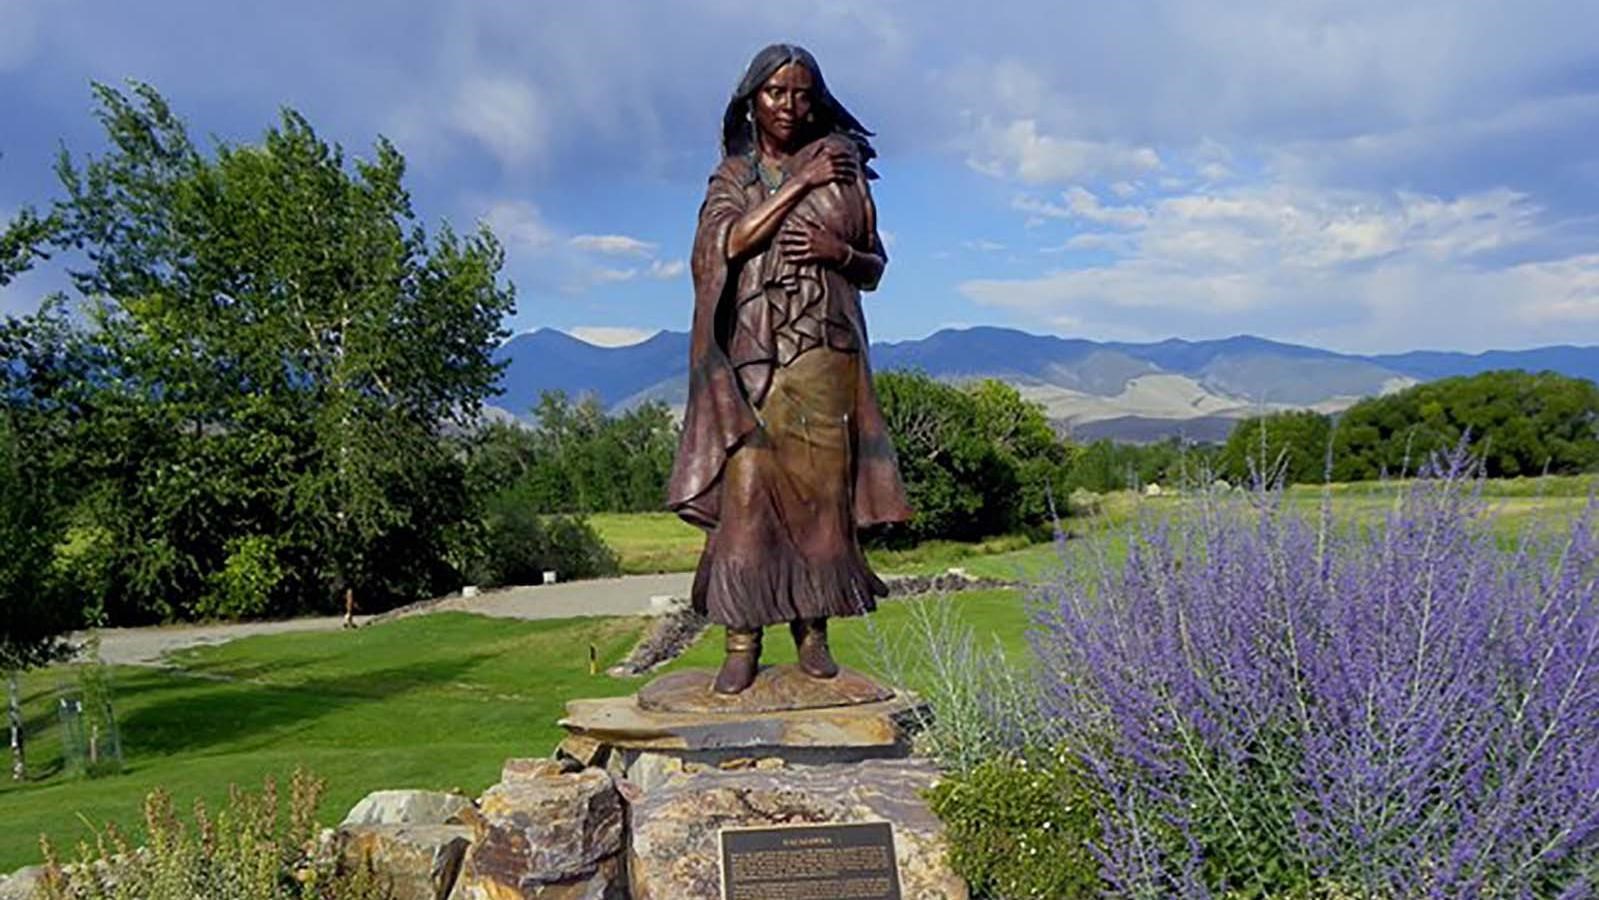 Statue of women in an open valley with mountains in the background